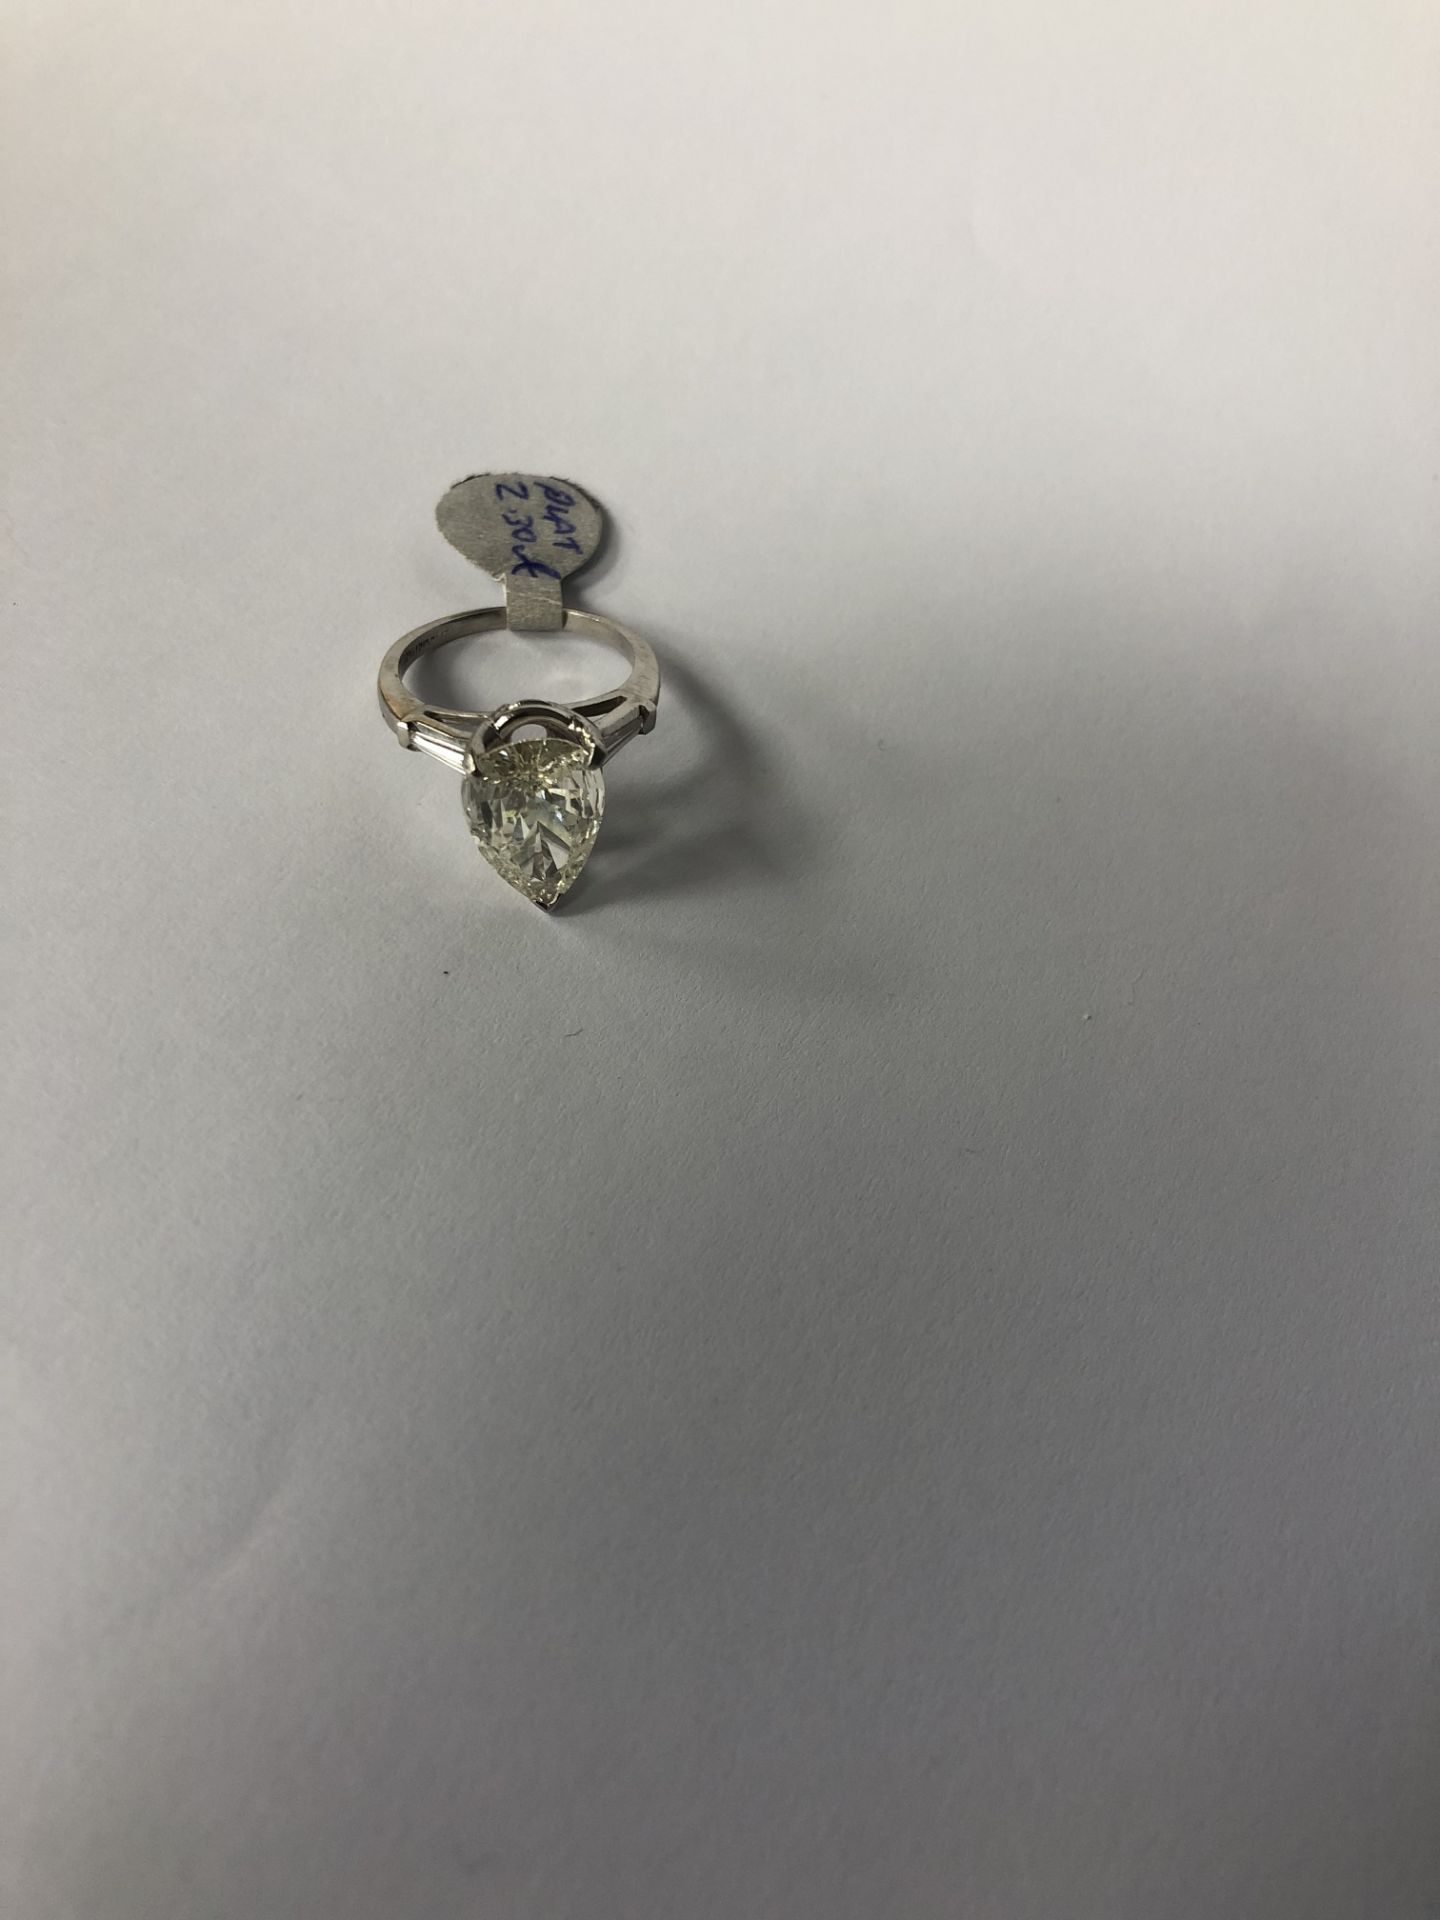 RRP £24,500 Platinum 2.3 Carat Diamond Teardrop Ring (Appraisals Available On Request) (Pictures For